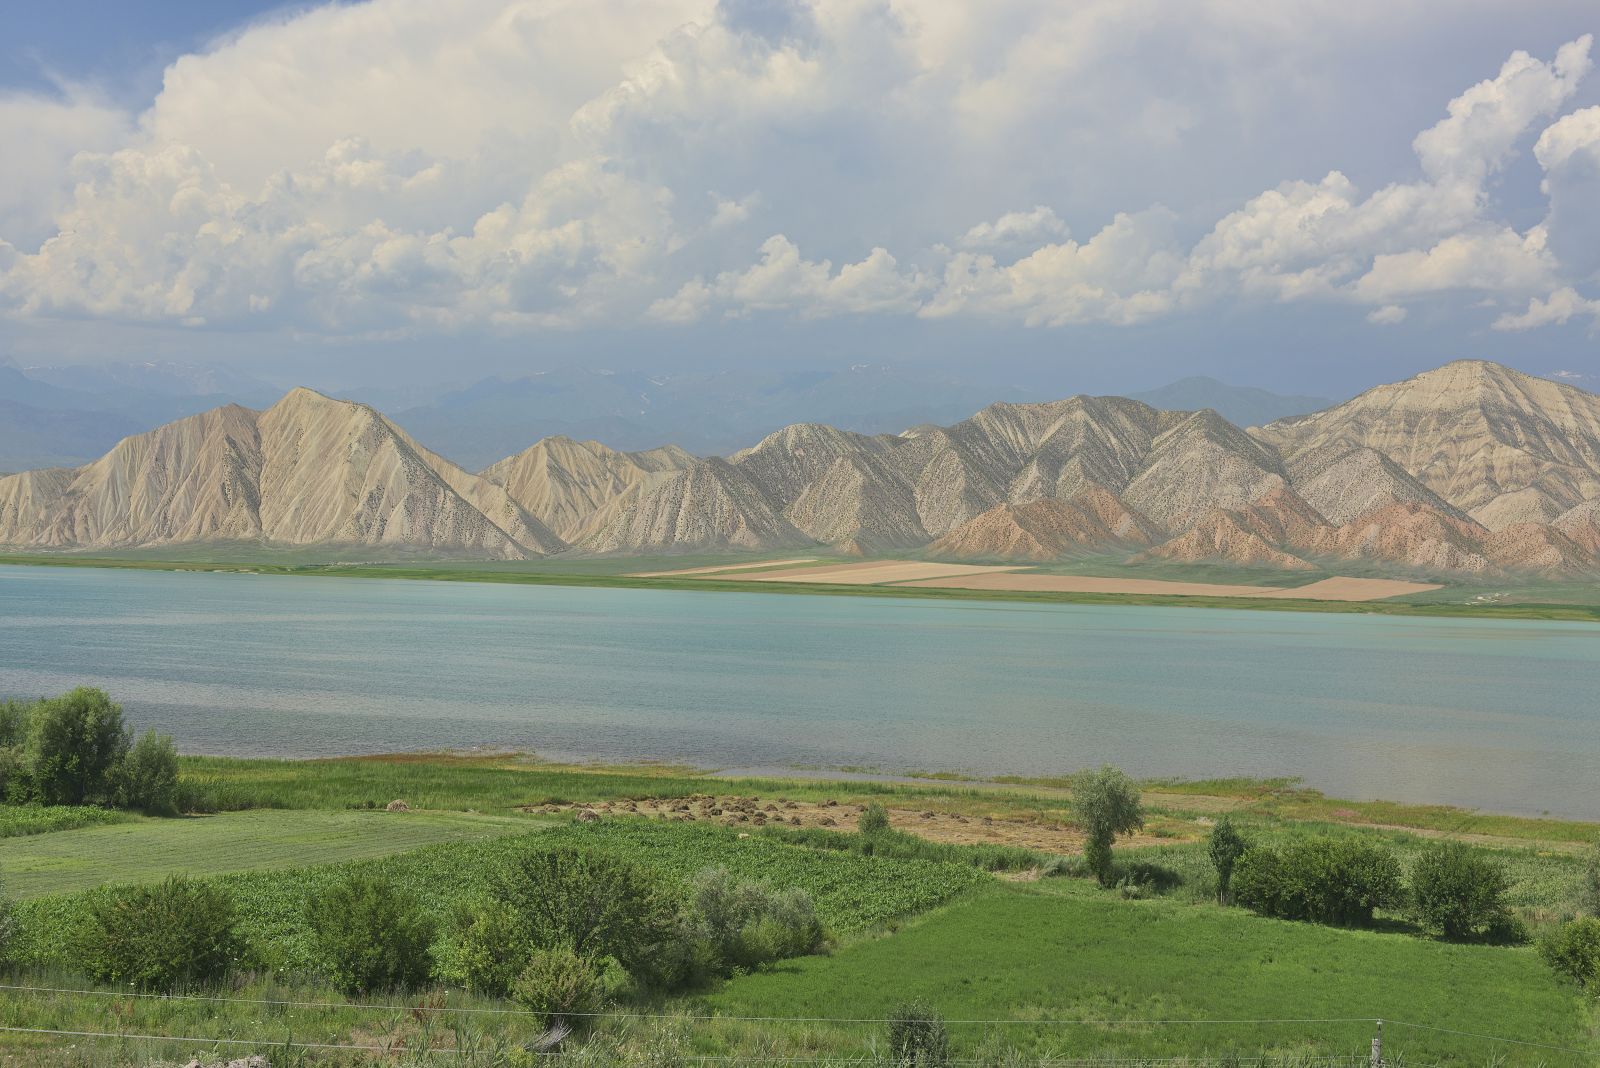 Kyrgyzstan: Swiss Mountain Paradise In Central Asia